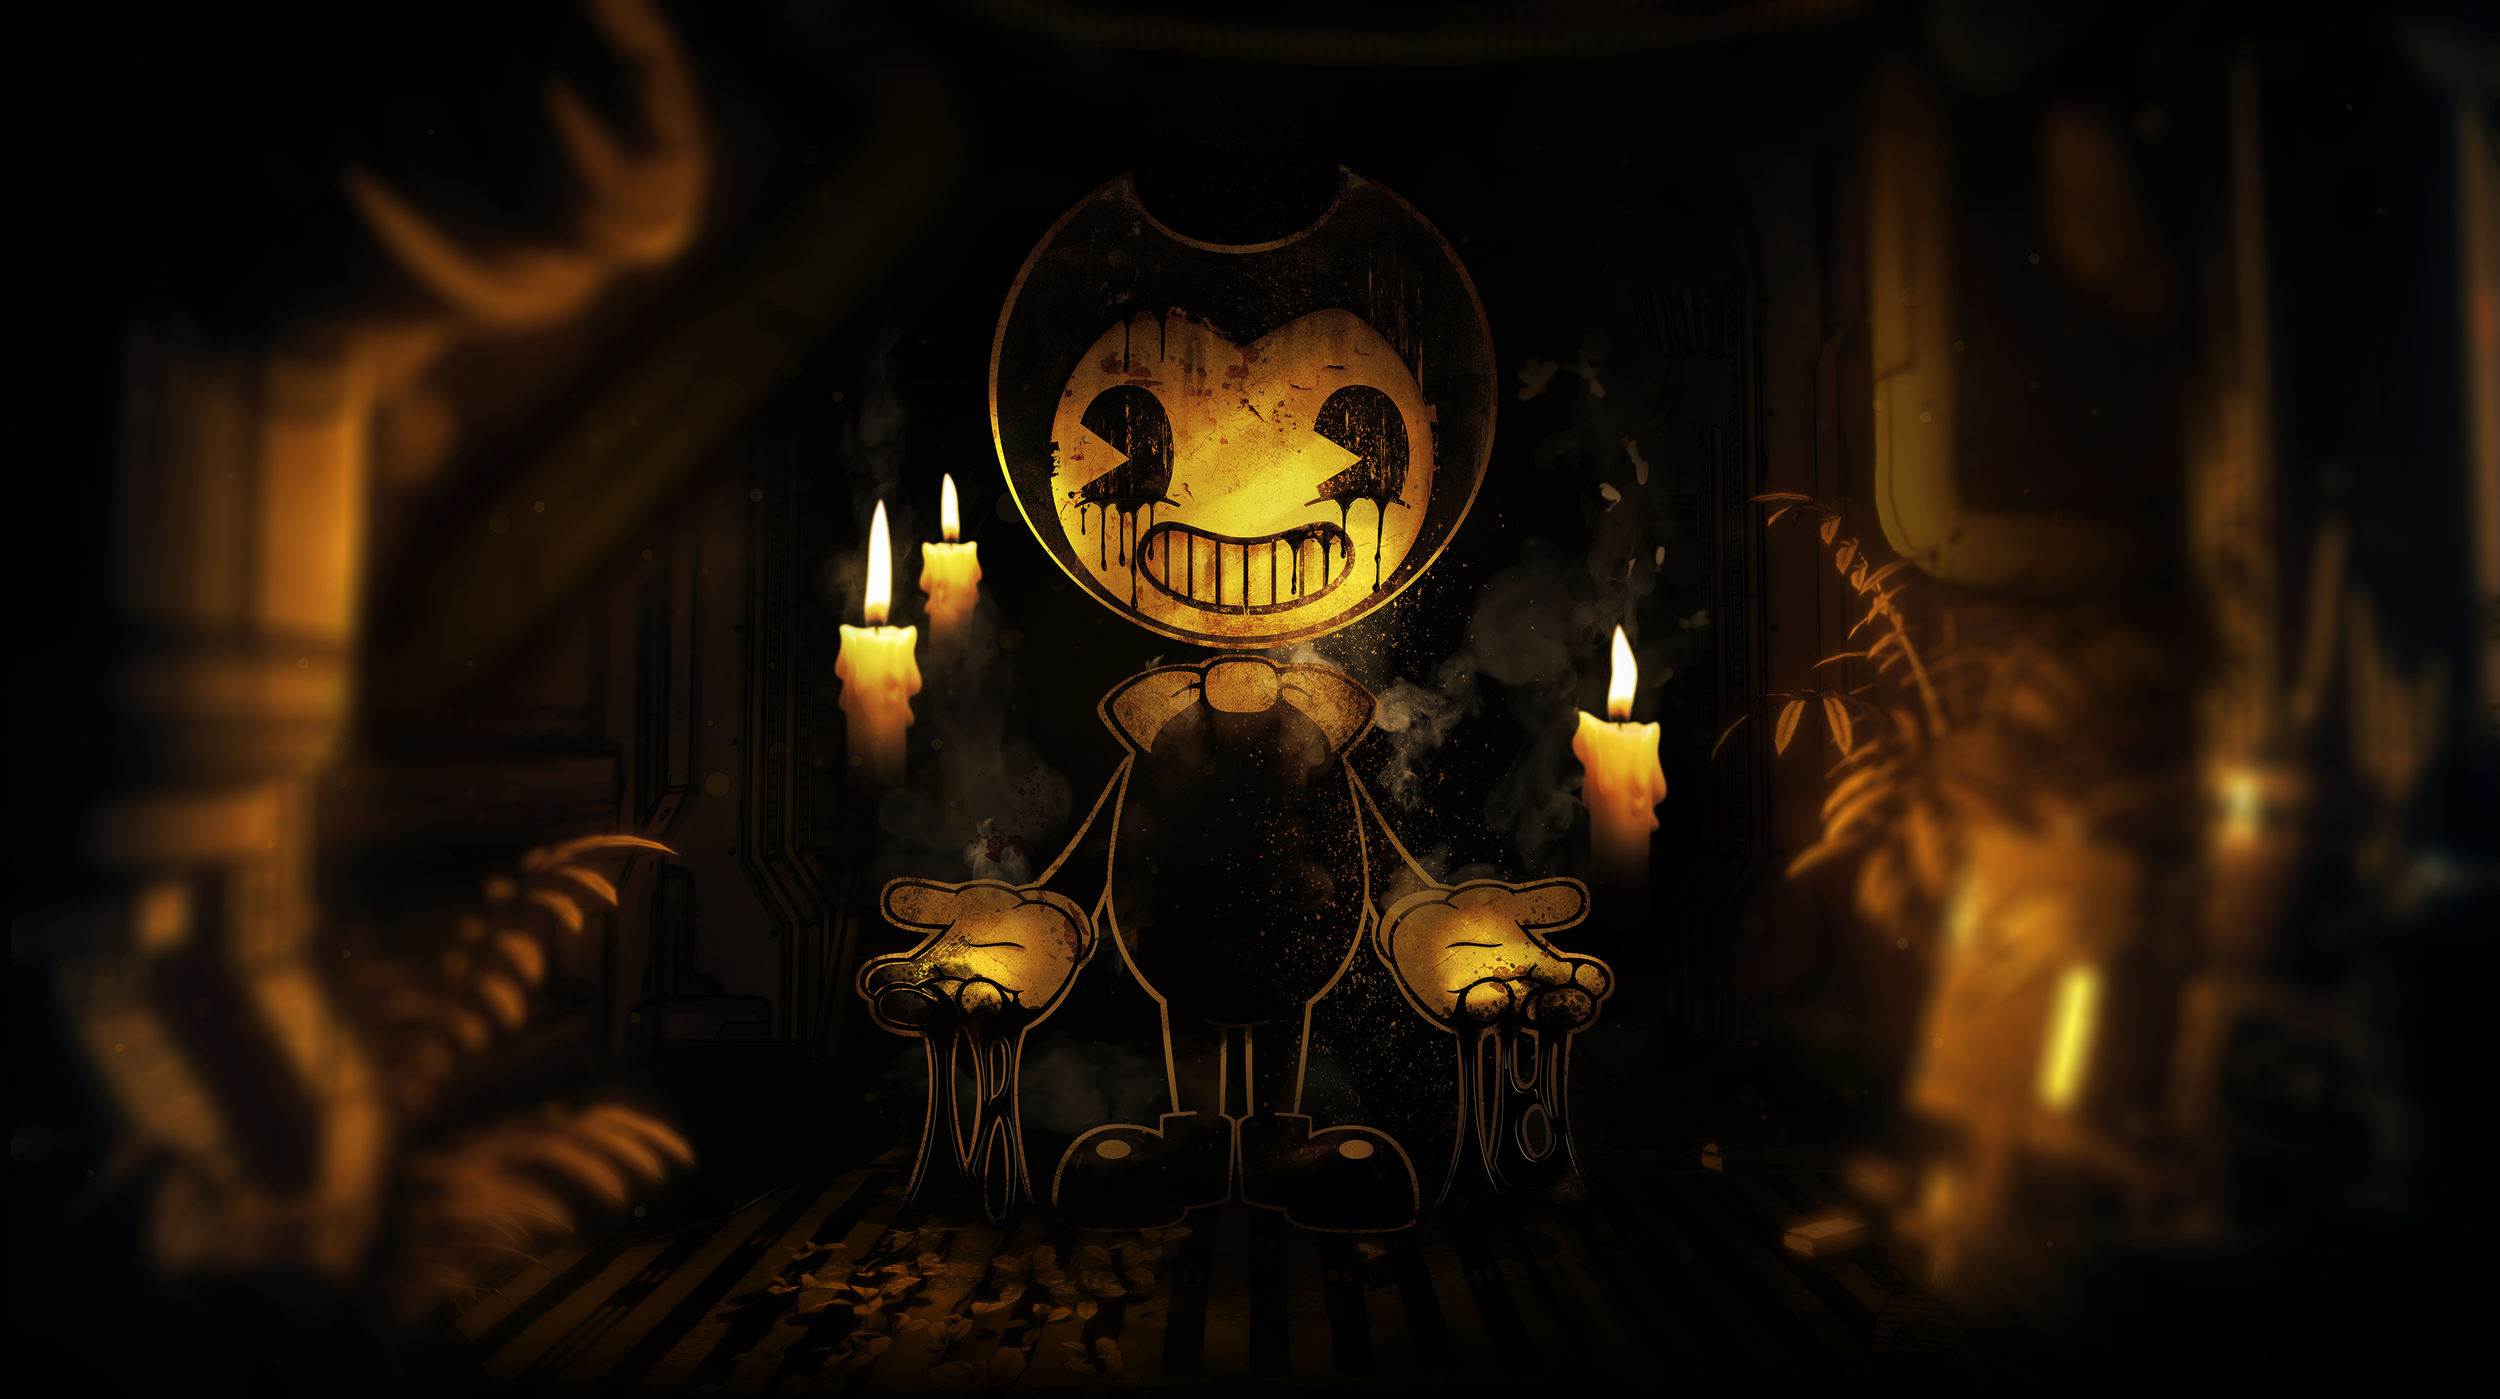 Bendy Chapter 5 ink machine APK for Android - Download